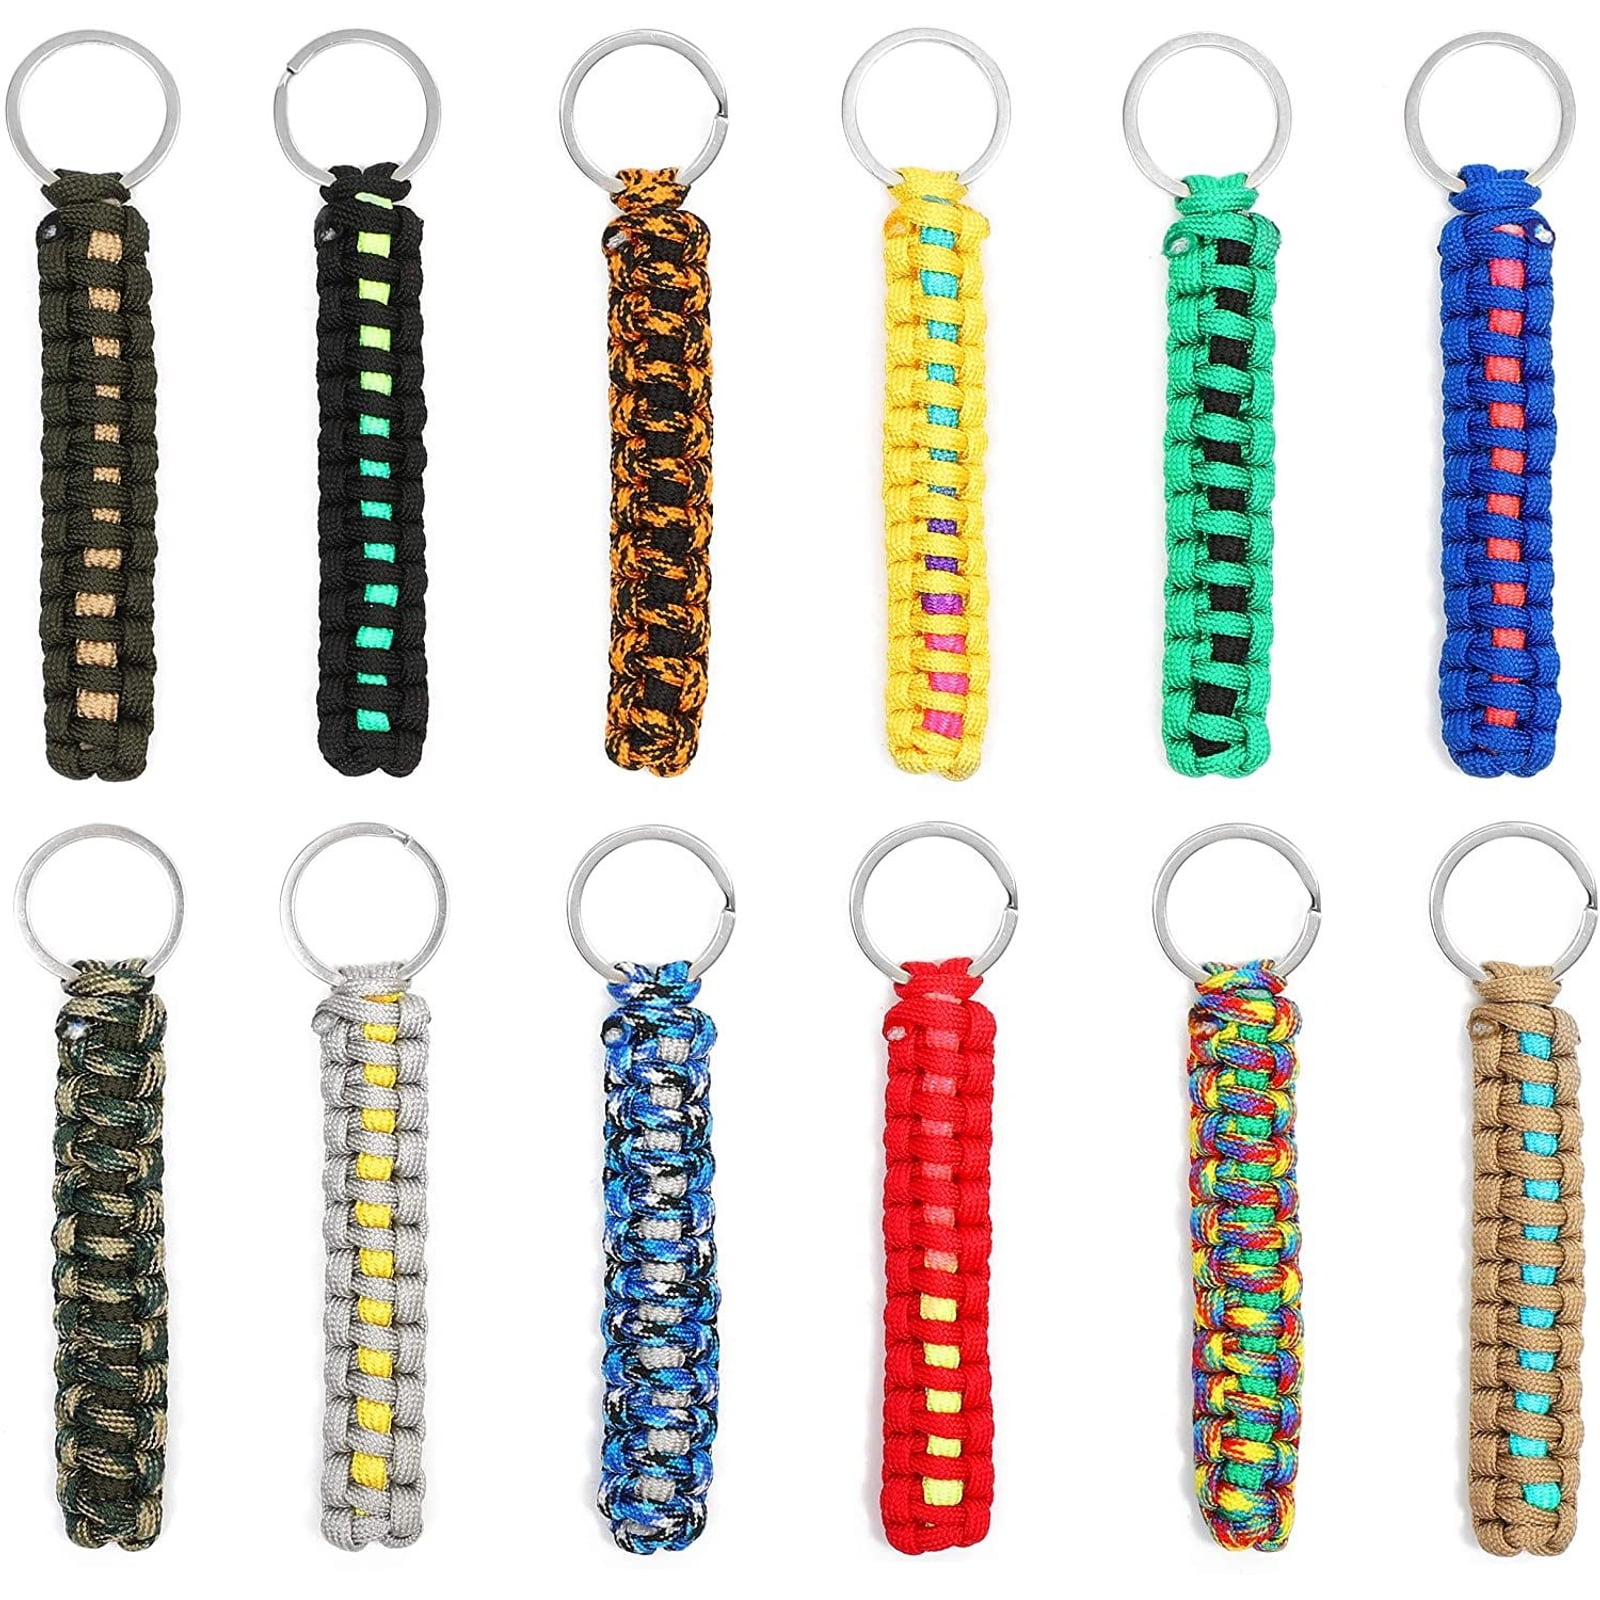 4 Colors Leather Weave Strap Metal Car Keychain Keyring Purse Bag Pendant Gift 